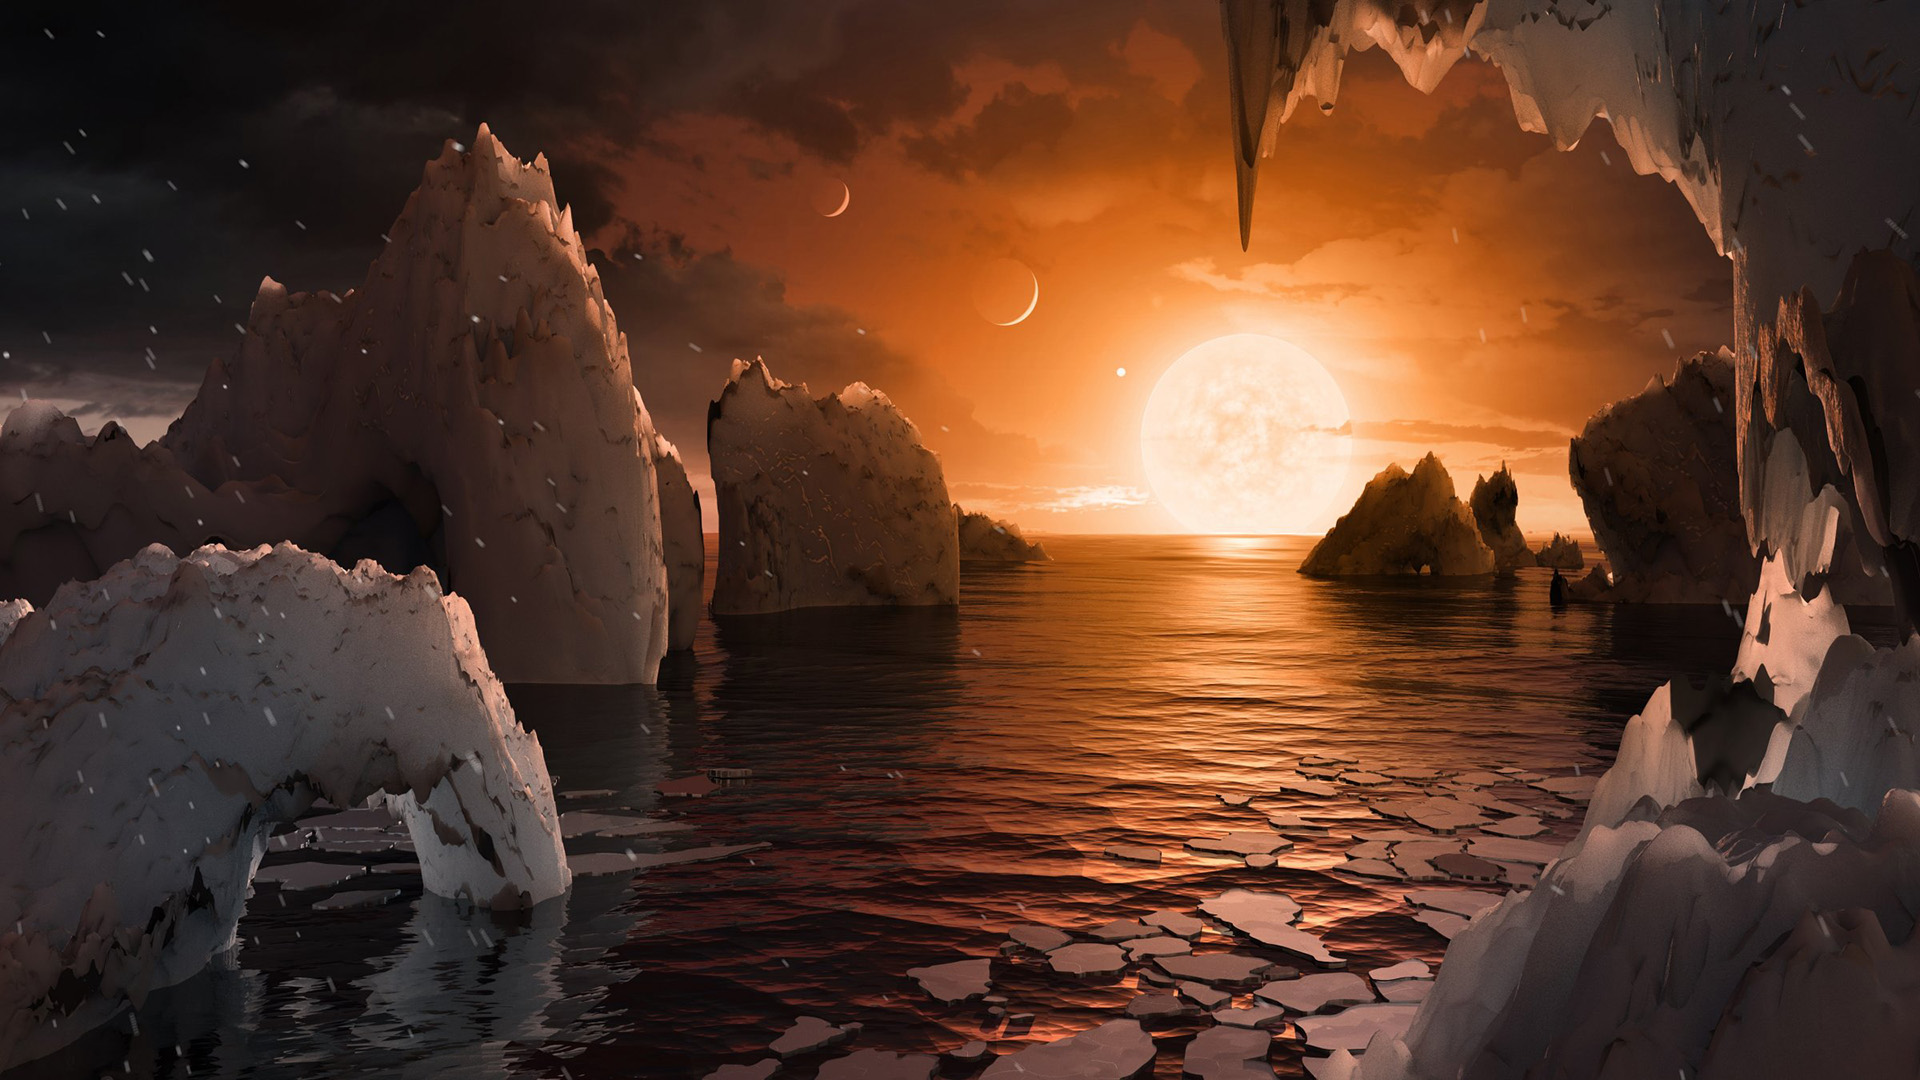 https://in-space.ru/wp-content/uploads/2017/02/trappist_planet.jpg